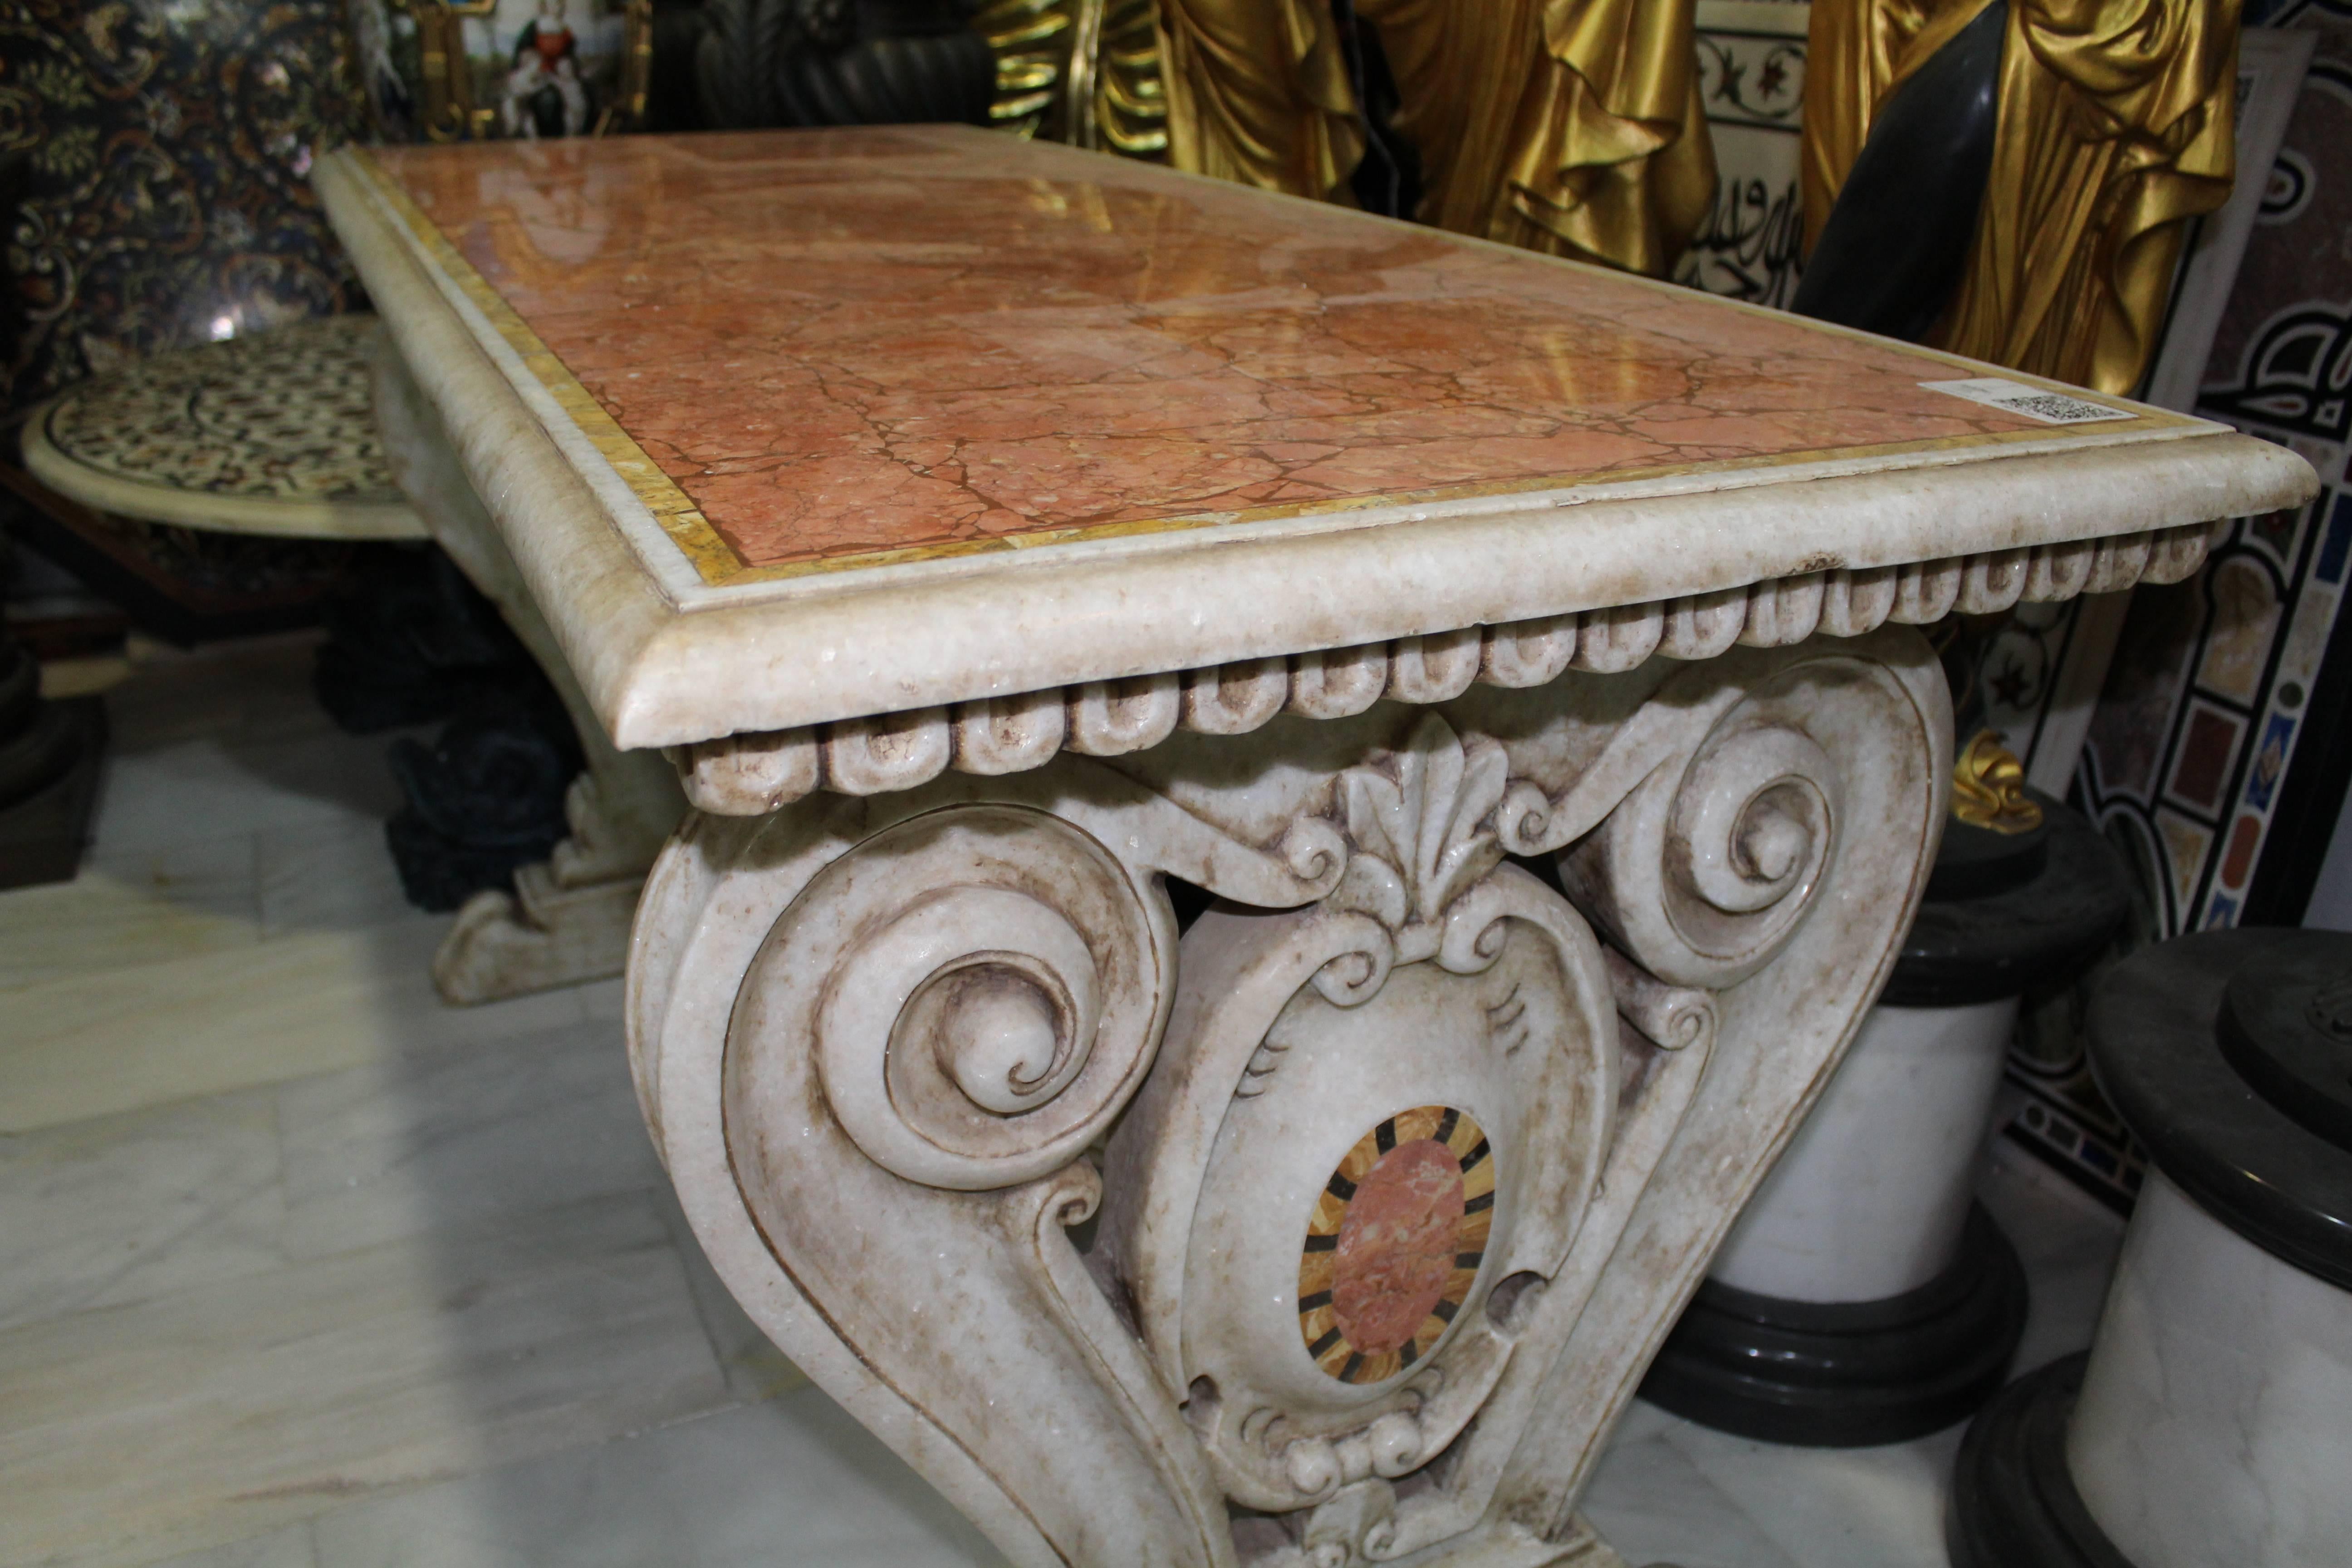 Hand-Carved Italian Aged Carrara Marble Mosaic Table in Florentine Pietre Dure Style